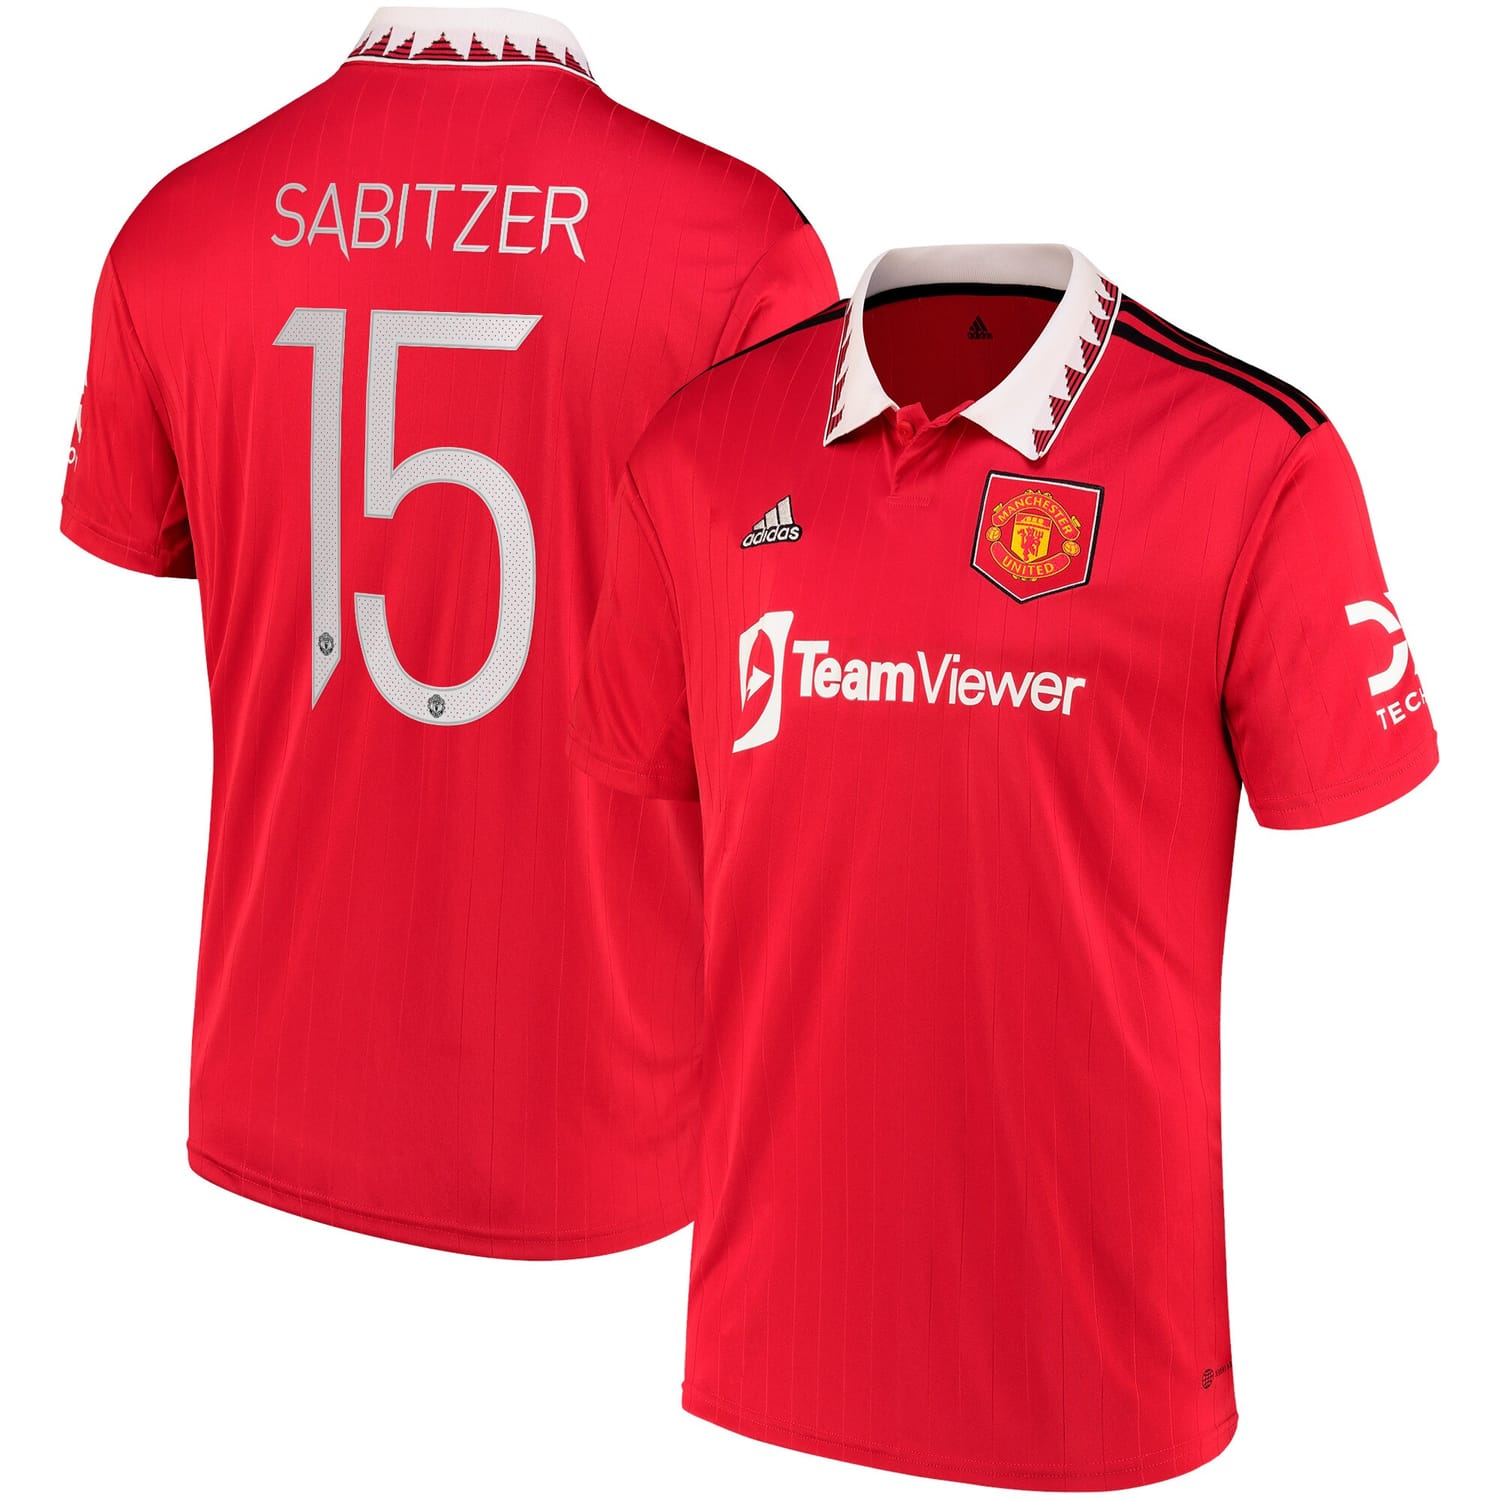 Premier League Manchester United Home Cup Jersey Shirt 2022-23 player Marcel Sabitzer 15 printing for Men